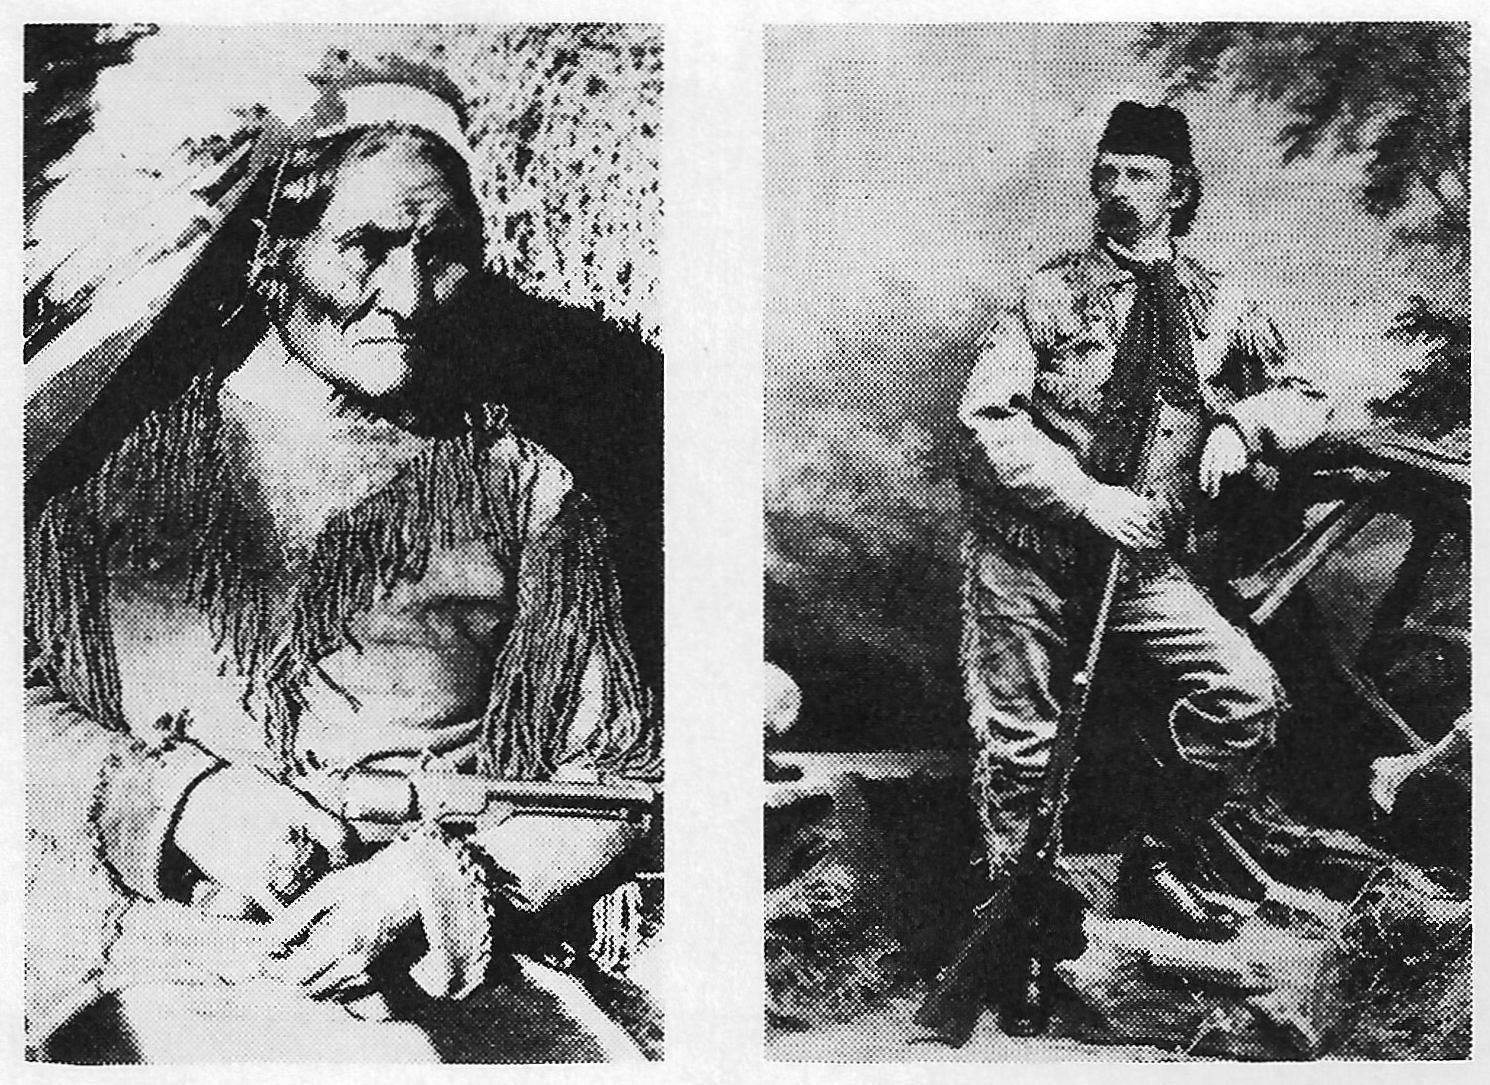 Geronimo and General George A. Custer.